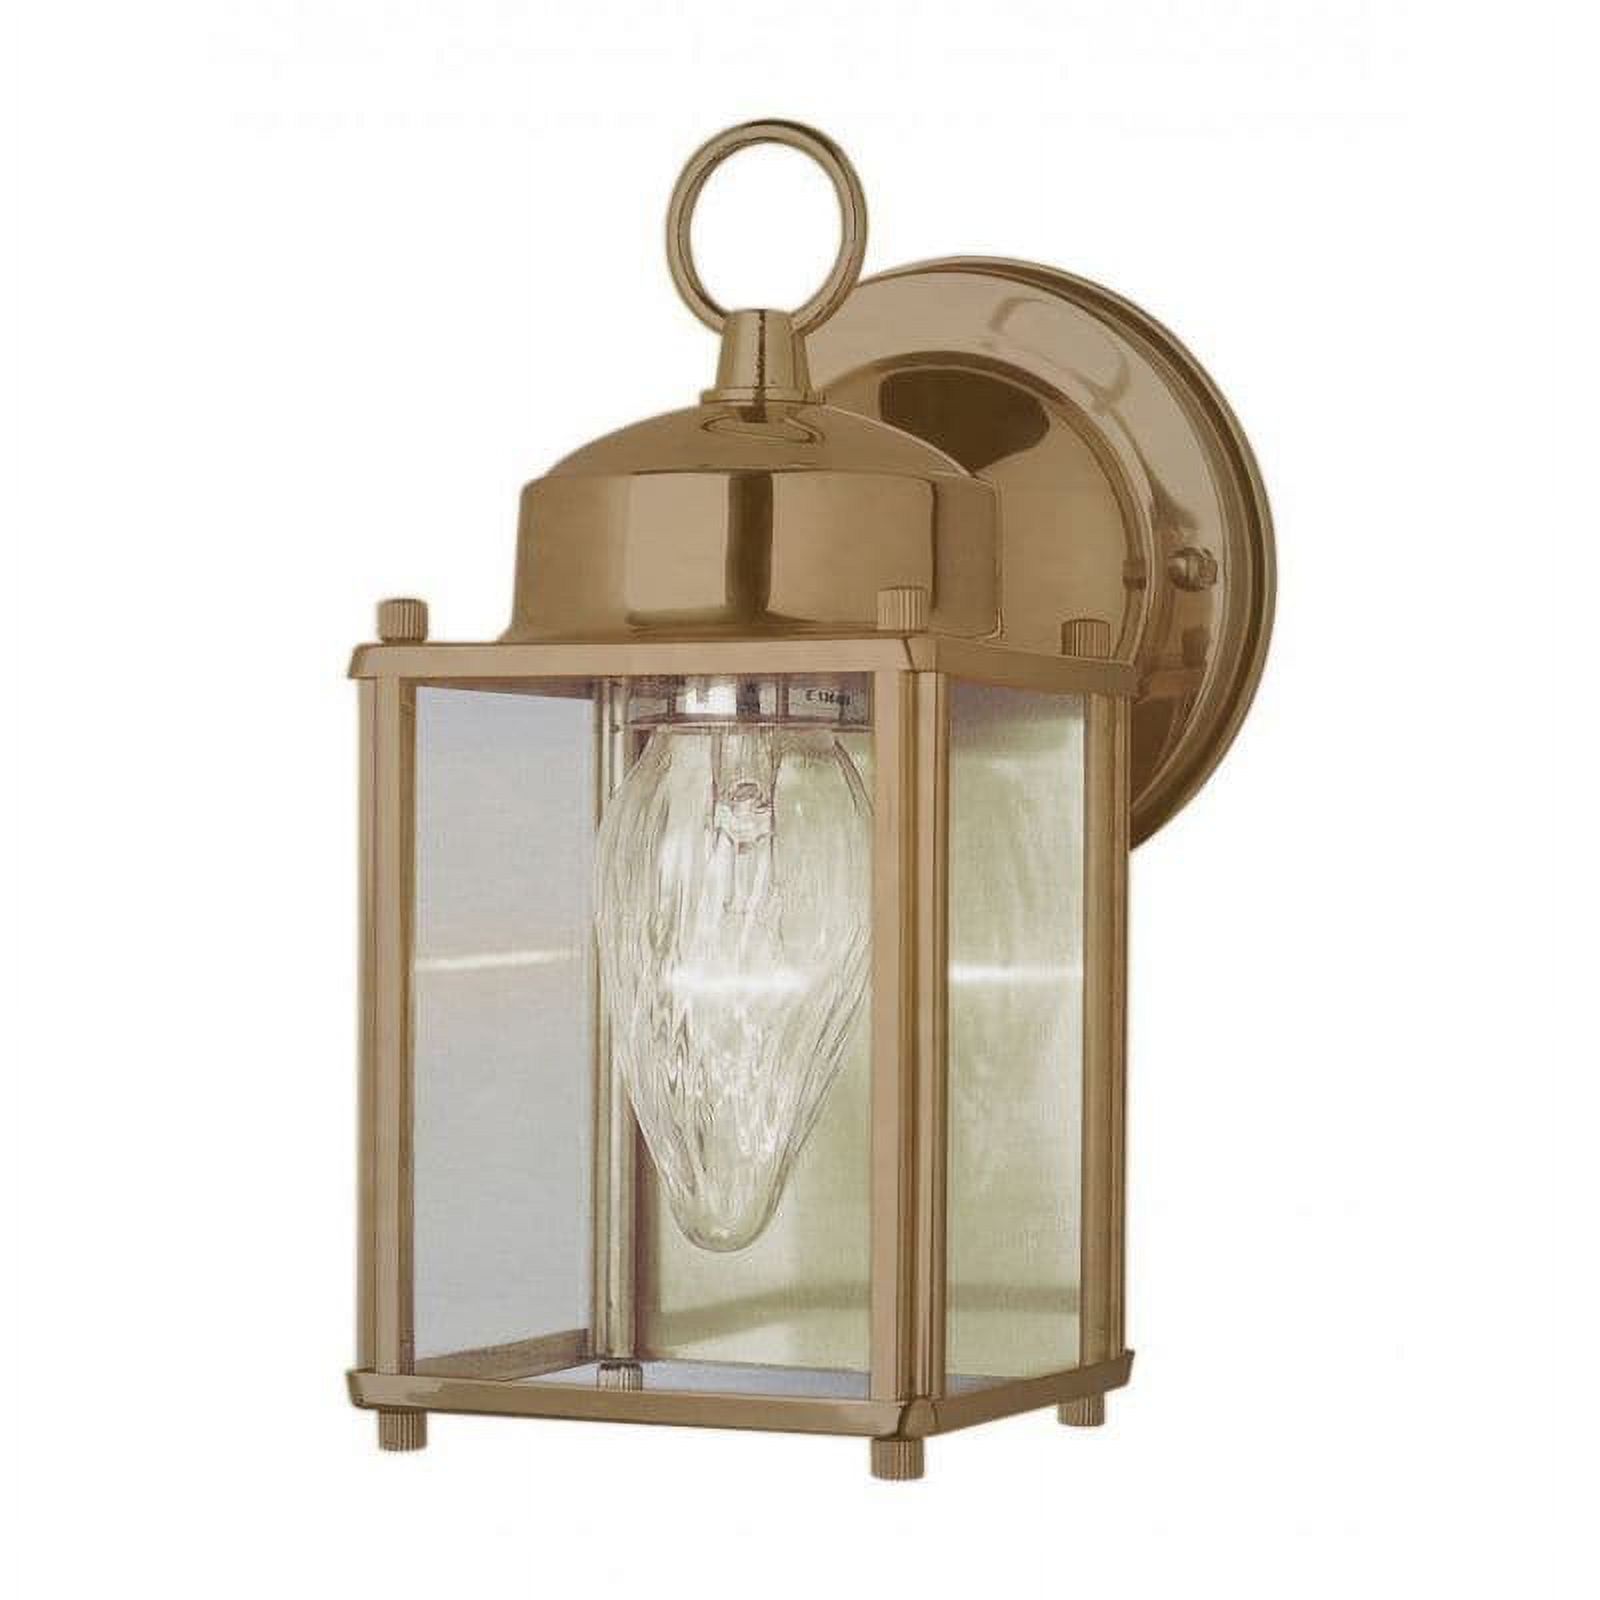 Trans Globe Lighting 4045 Antique Bass Century 1 Light 9" Tall Outdoor Wall Sconce - image 2 of 2